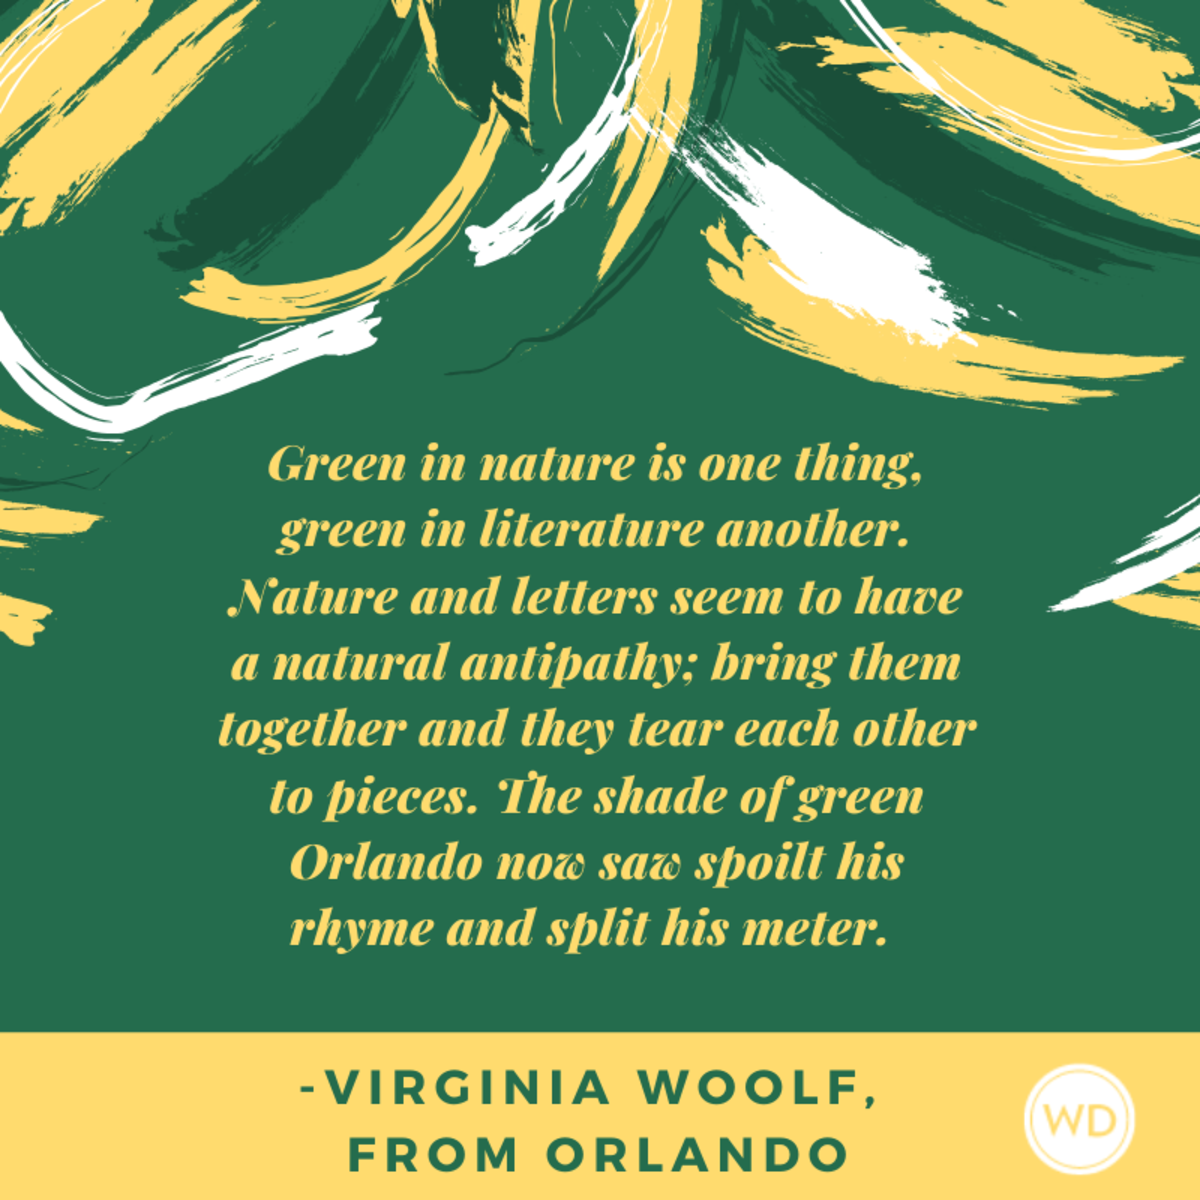 Virginia Woolf quotes